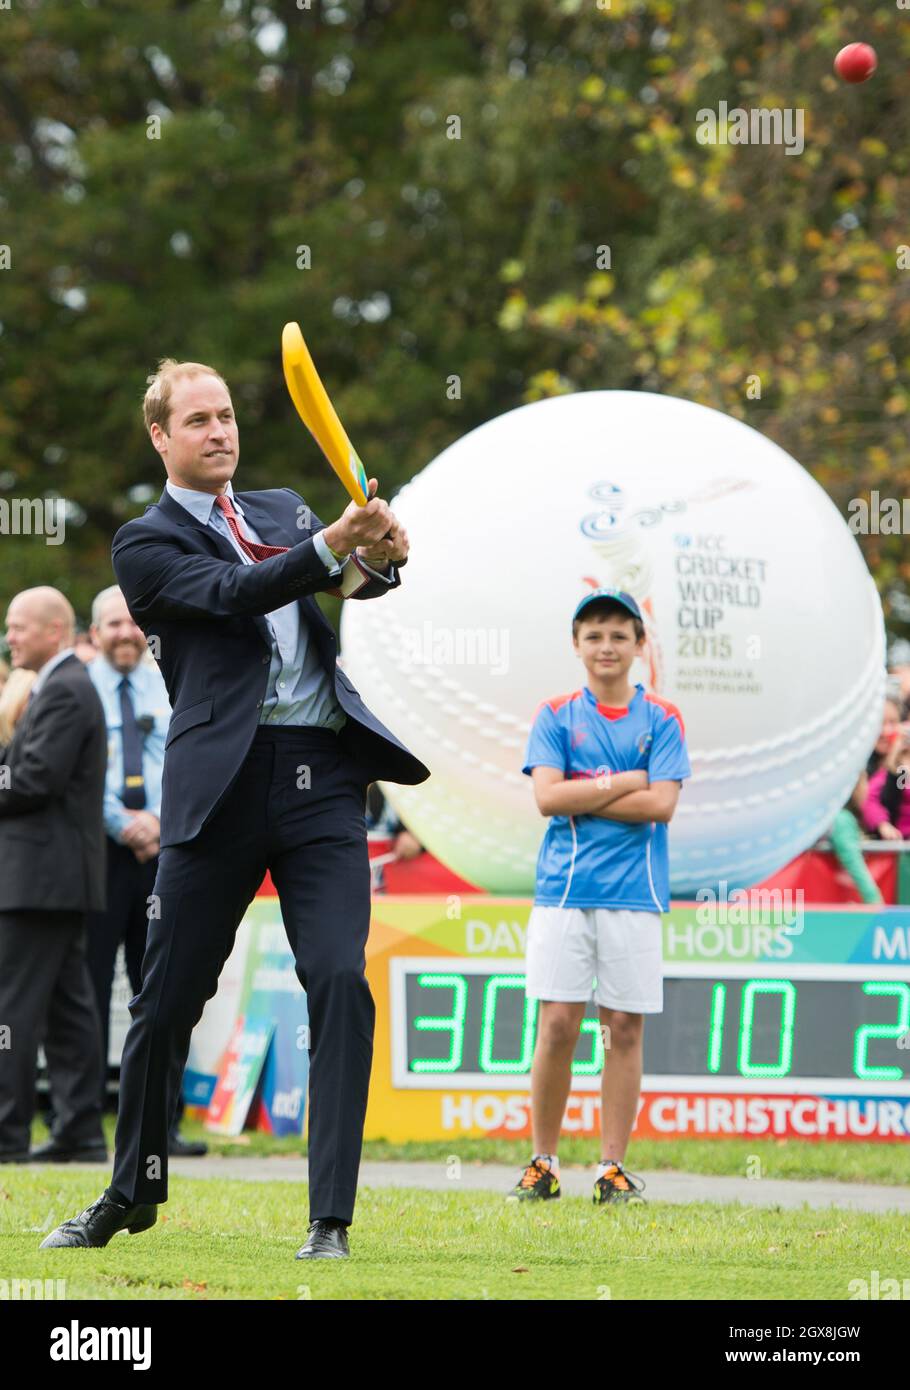 Prince William, Duke of Cambridge bats during a game of cricket in a 2015 Cricket World Cup event in Christchurch, New Zealand on April 14, 2014.  Stock Photo